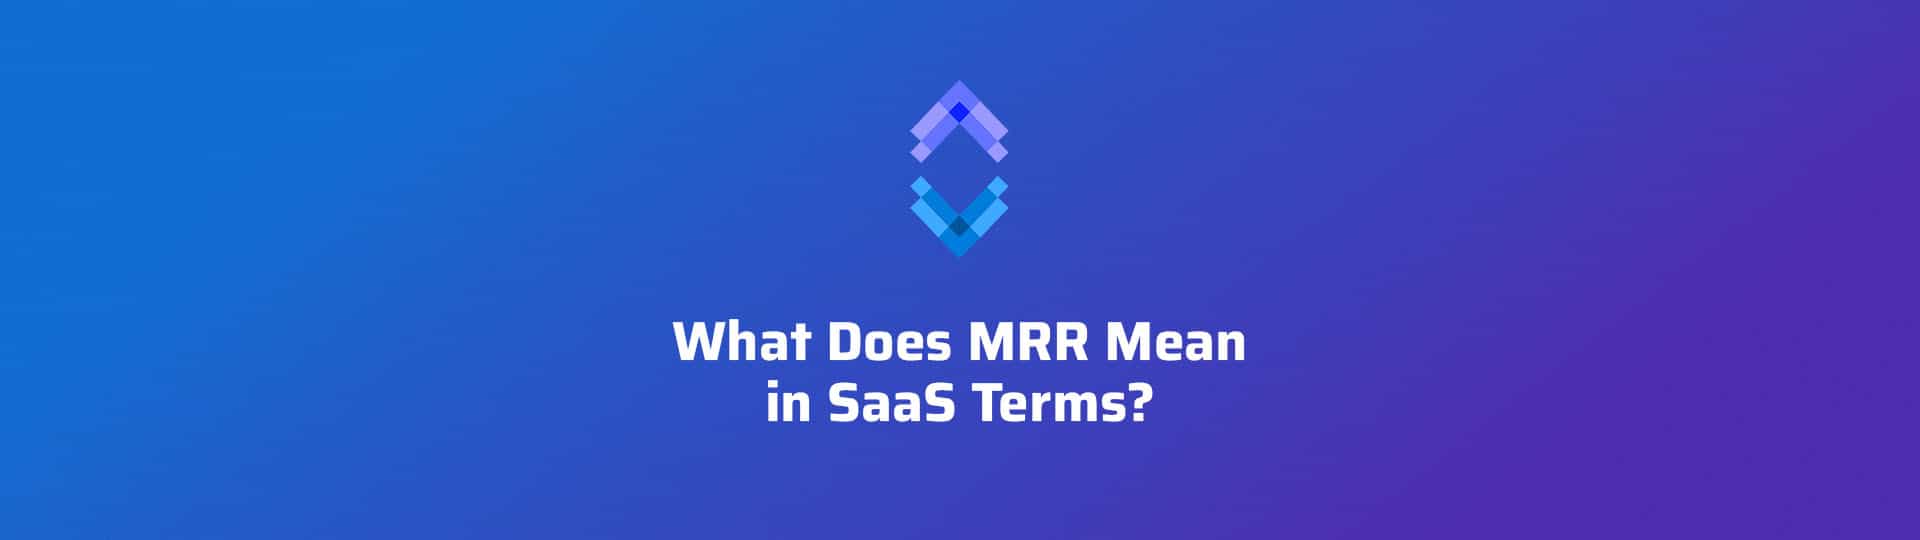 What Does MRR Mean in SaaS Terms?